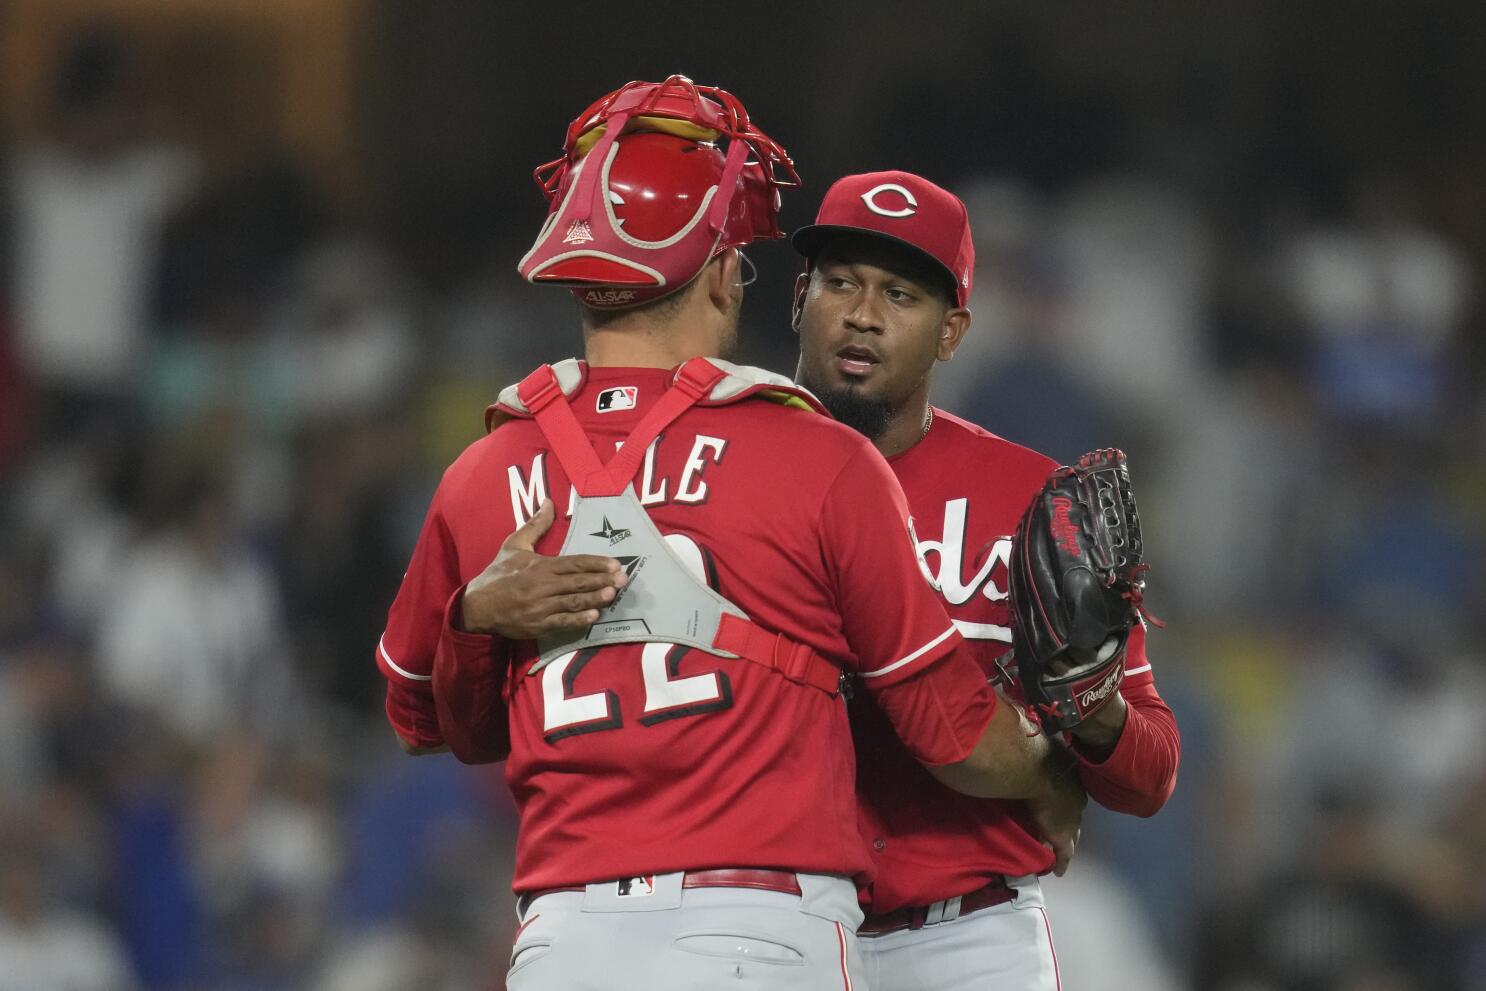 Alexis Diaz Contract: Breaking down Reds pitcher's salary details